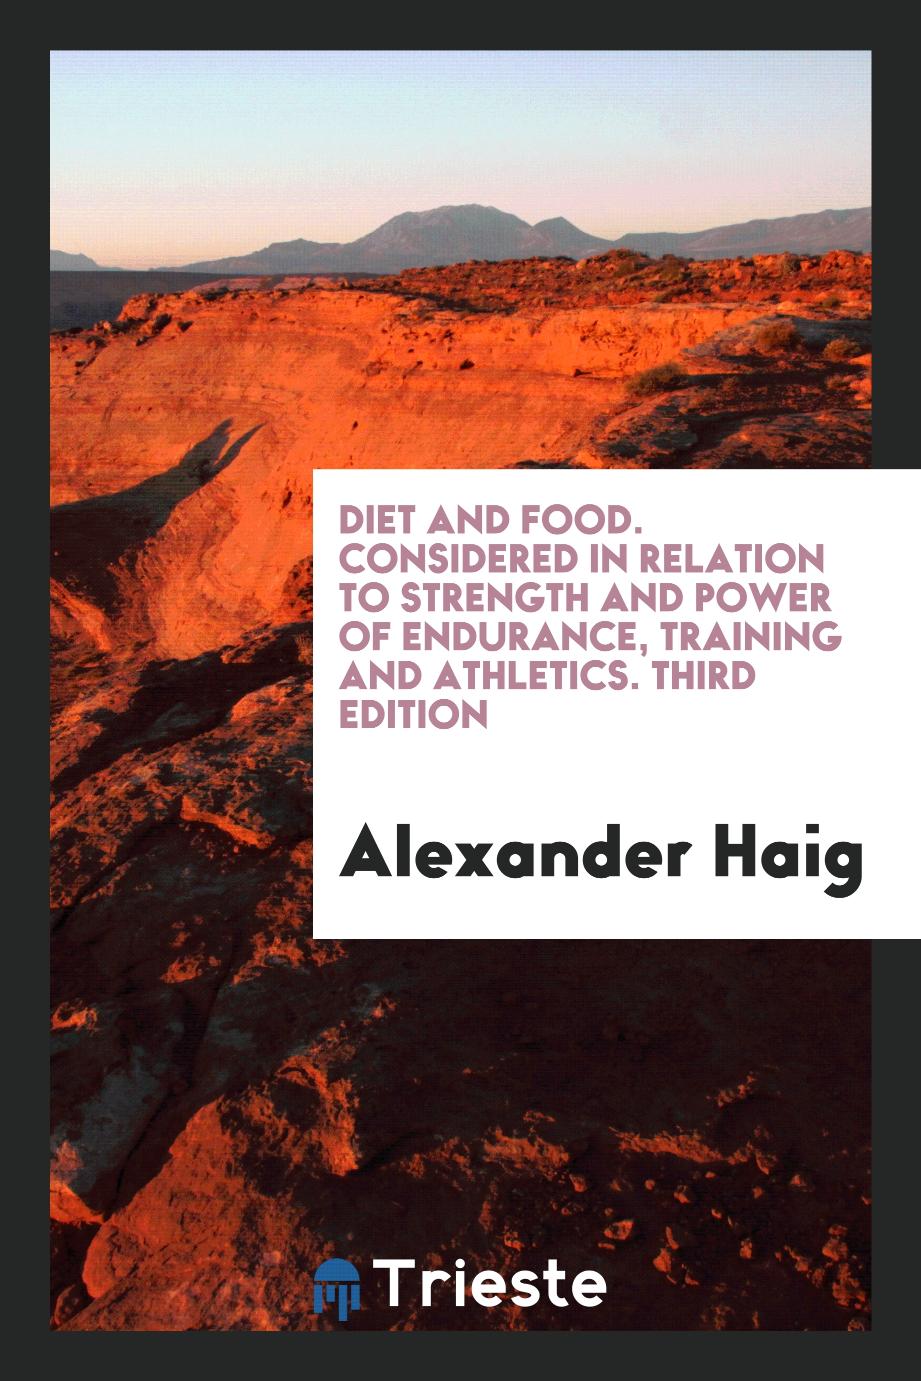 Diet and Food. Considered in Relation to Strength and Power of Endurance, Training and Athletics. Third Edition